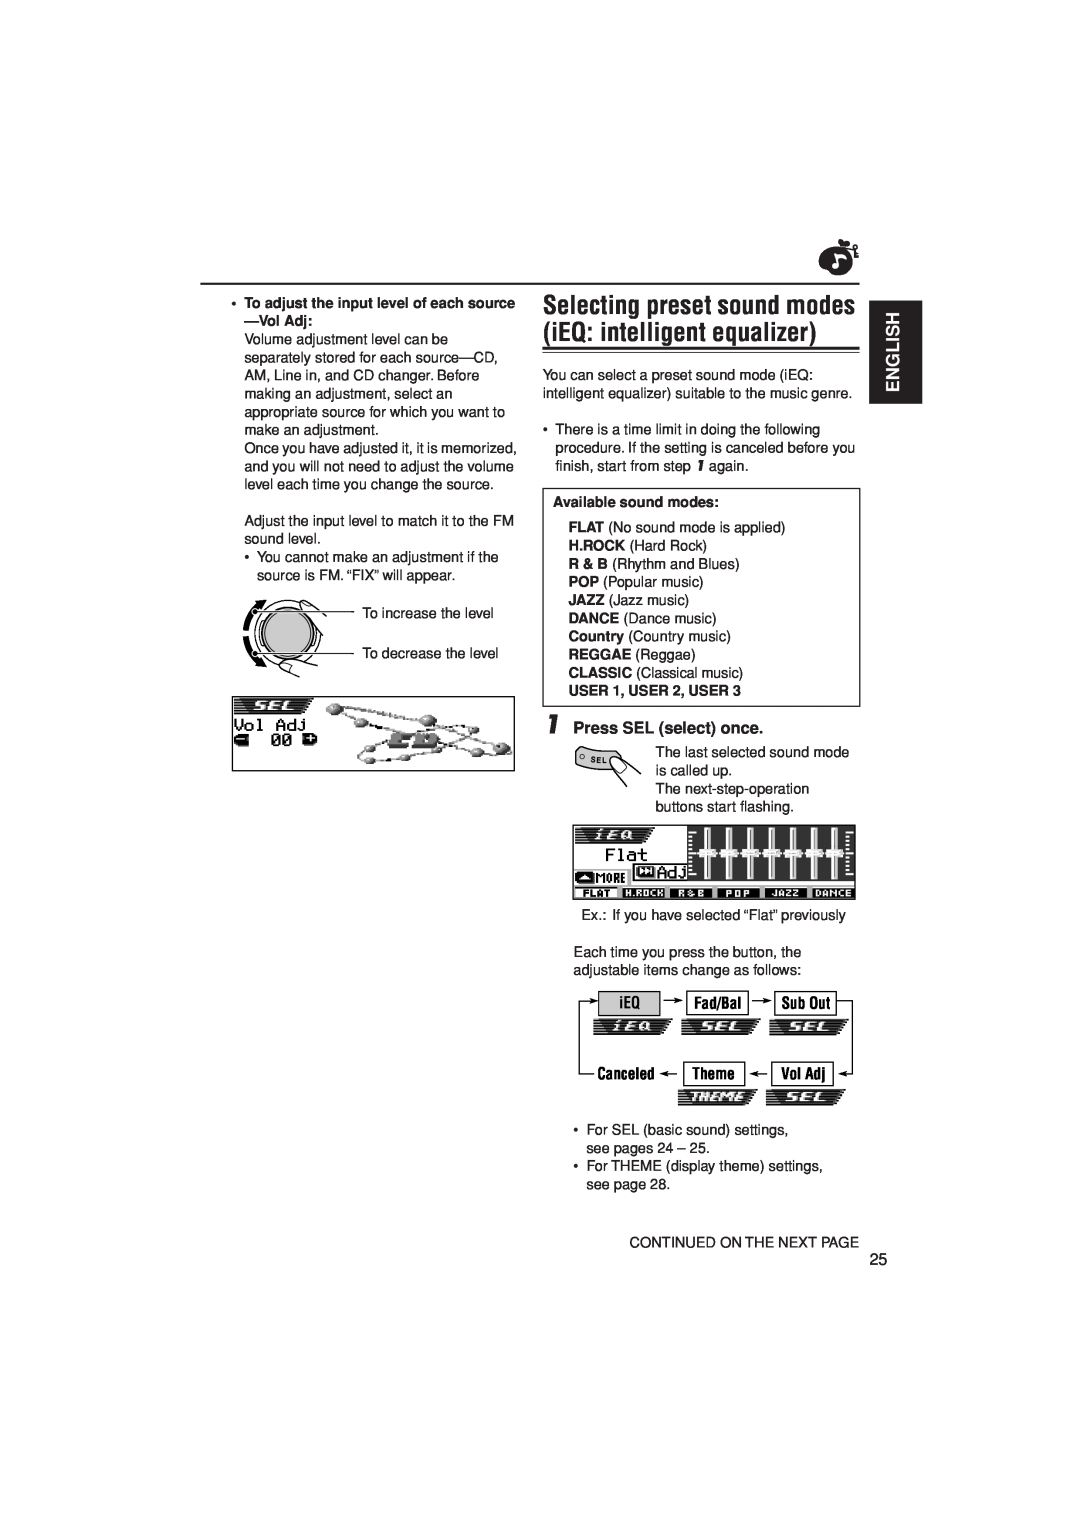 JVC KD-LH305 English, Press SEL select once, Canceled Theme Vol Adj, To adjust the input level of each source -VolAdj 